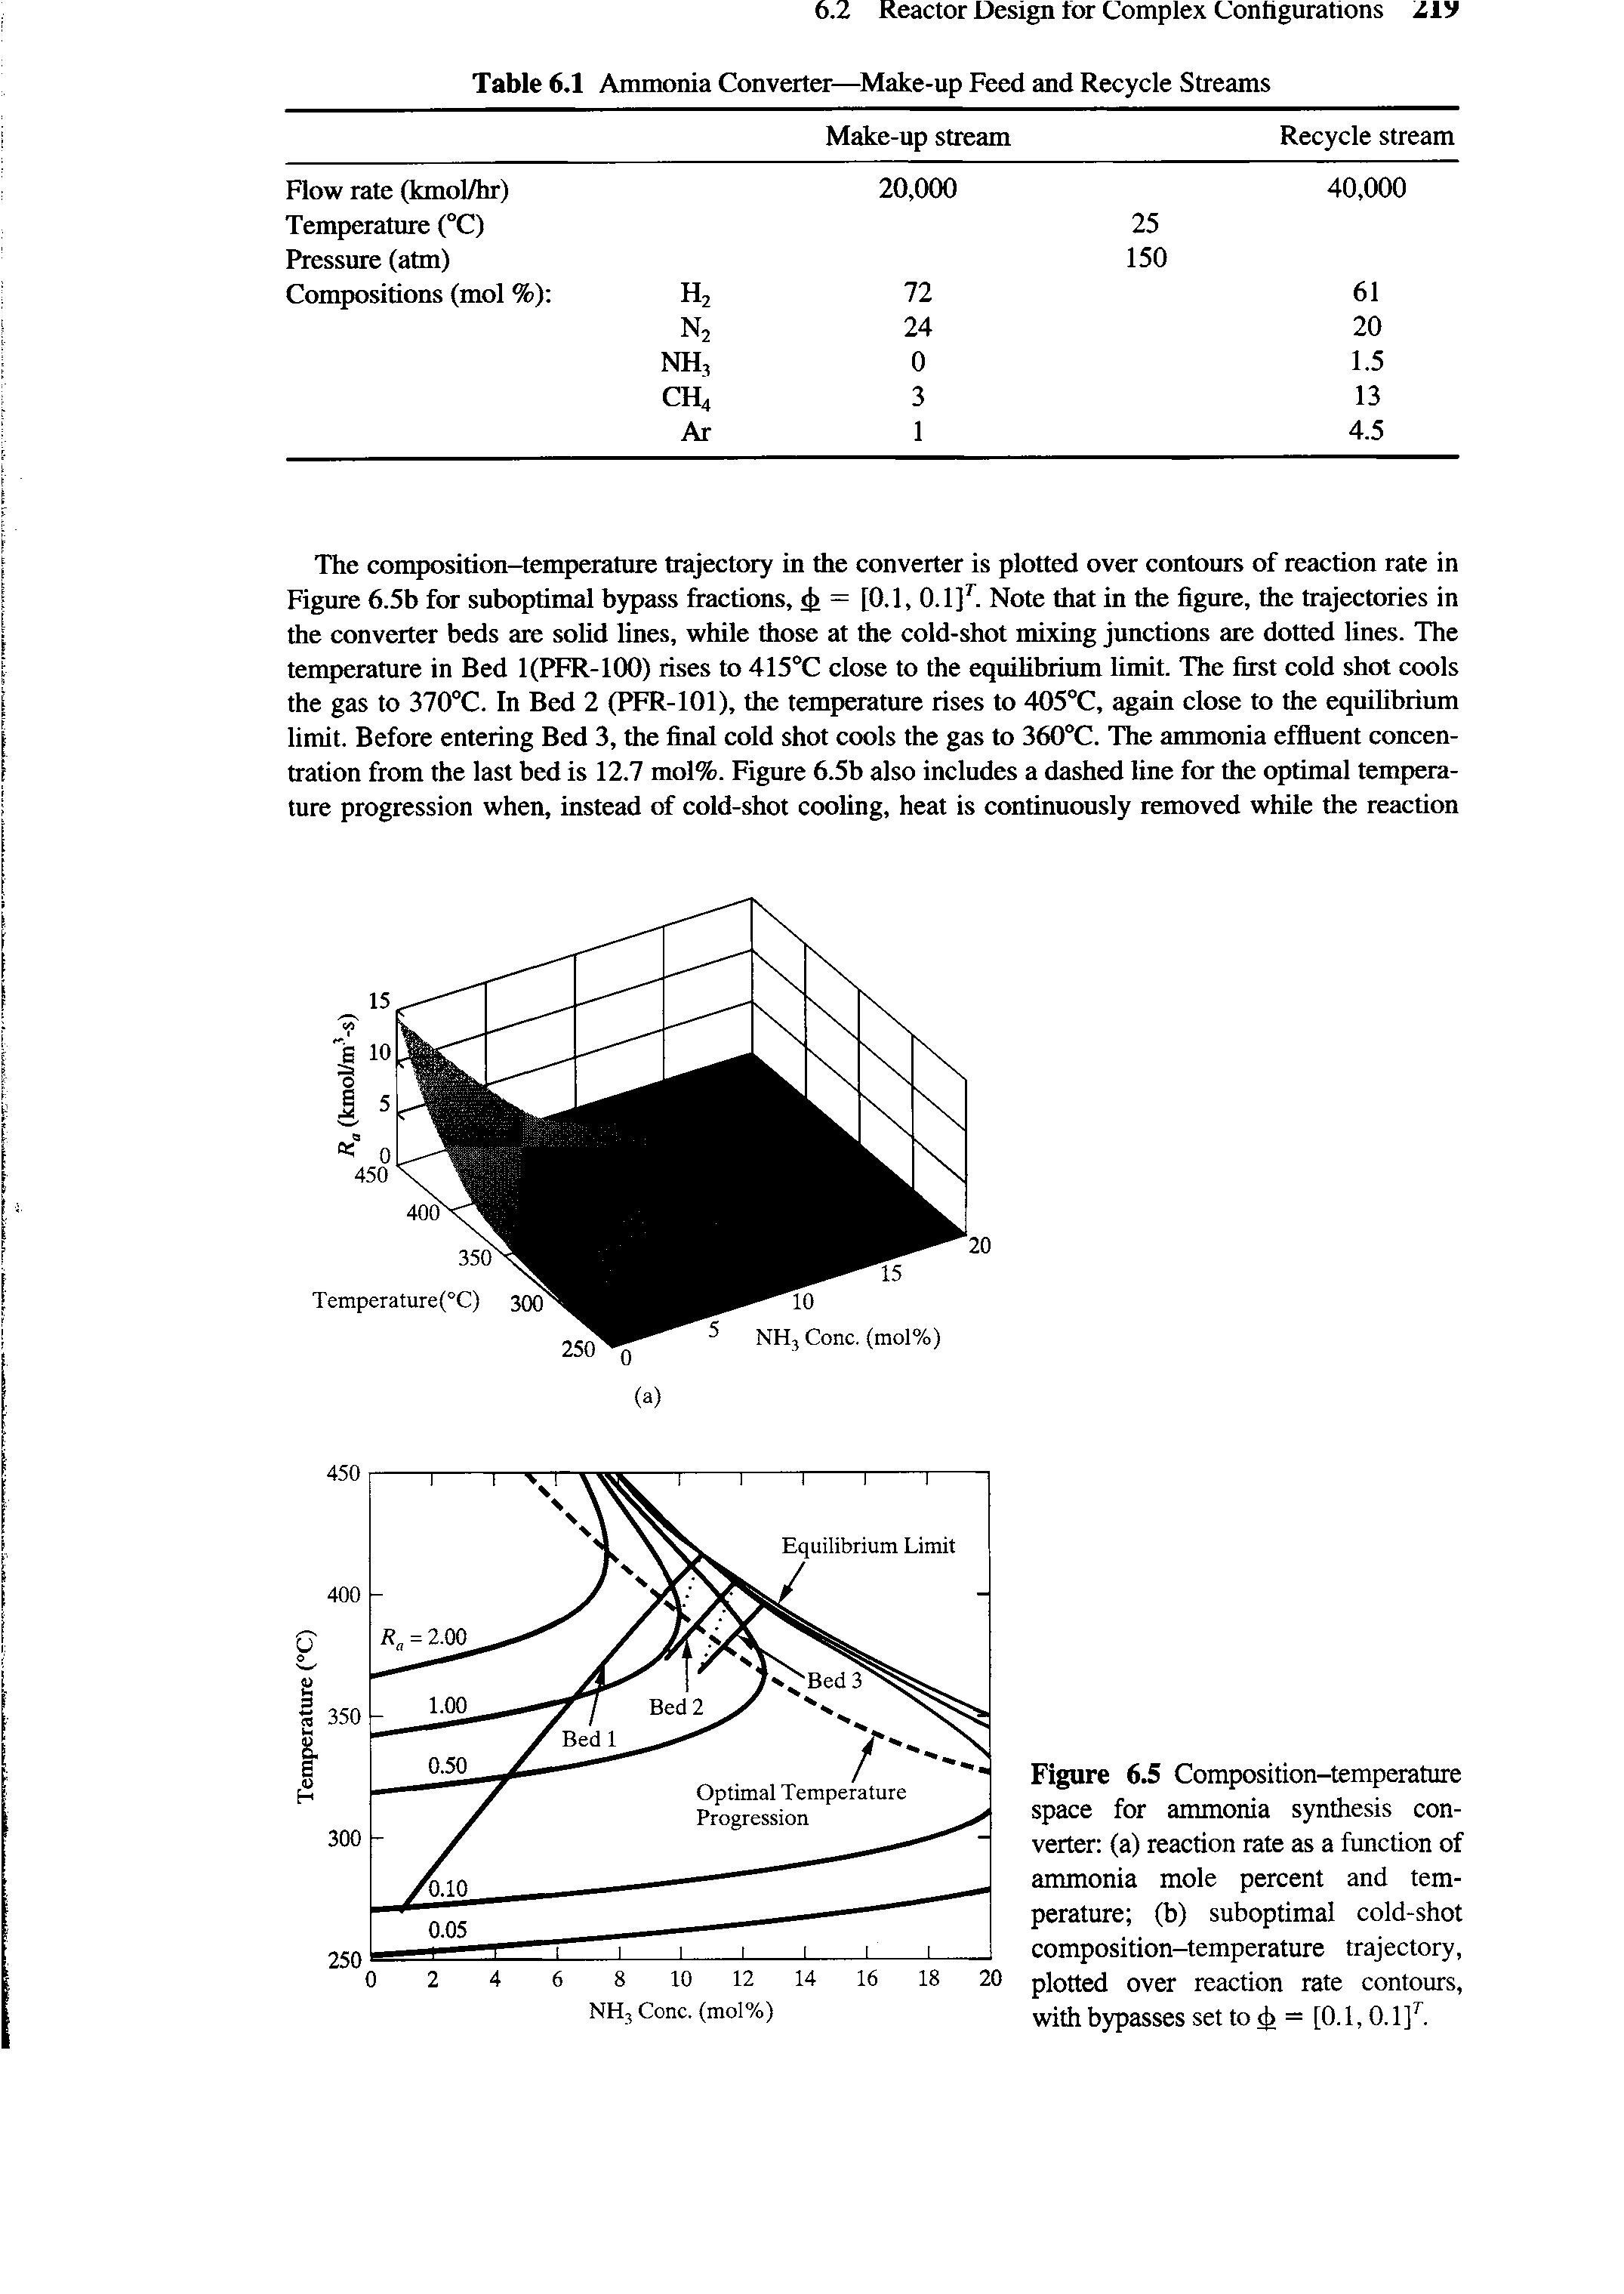 Figure 6.5 Composition-temperature space for ammonia synthesis converter (a) reaction rate as a function of ammonia mole percent and temperature (b) suboptimal cold-shot composition-temperature traj ectory, plotted over reaction rate contours, with bypasses set to = [0.1,0.1]. ...